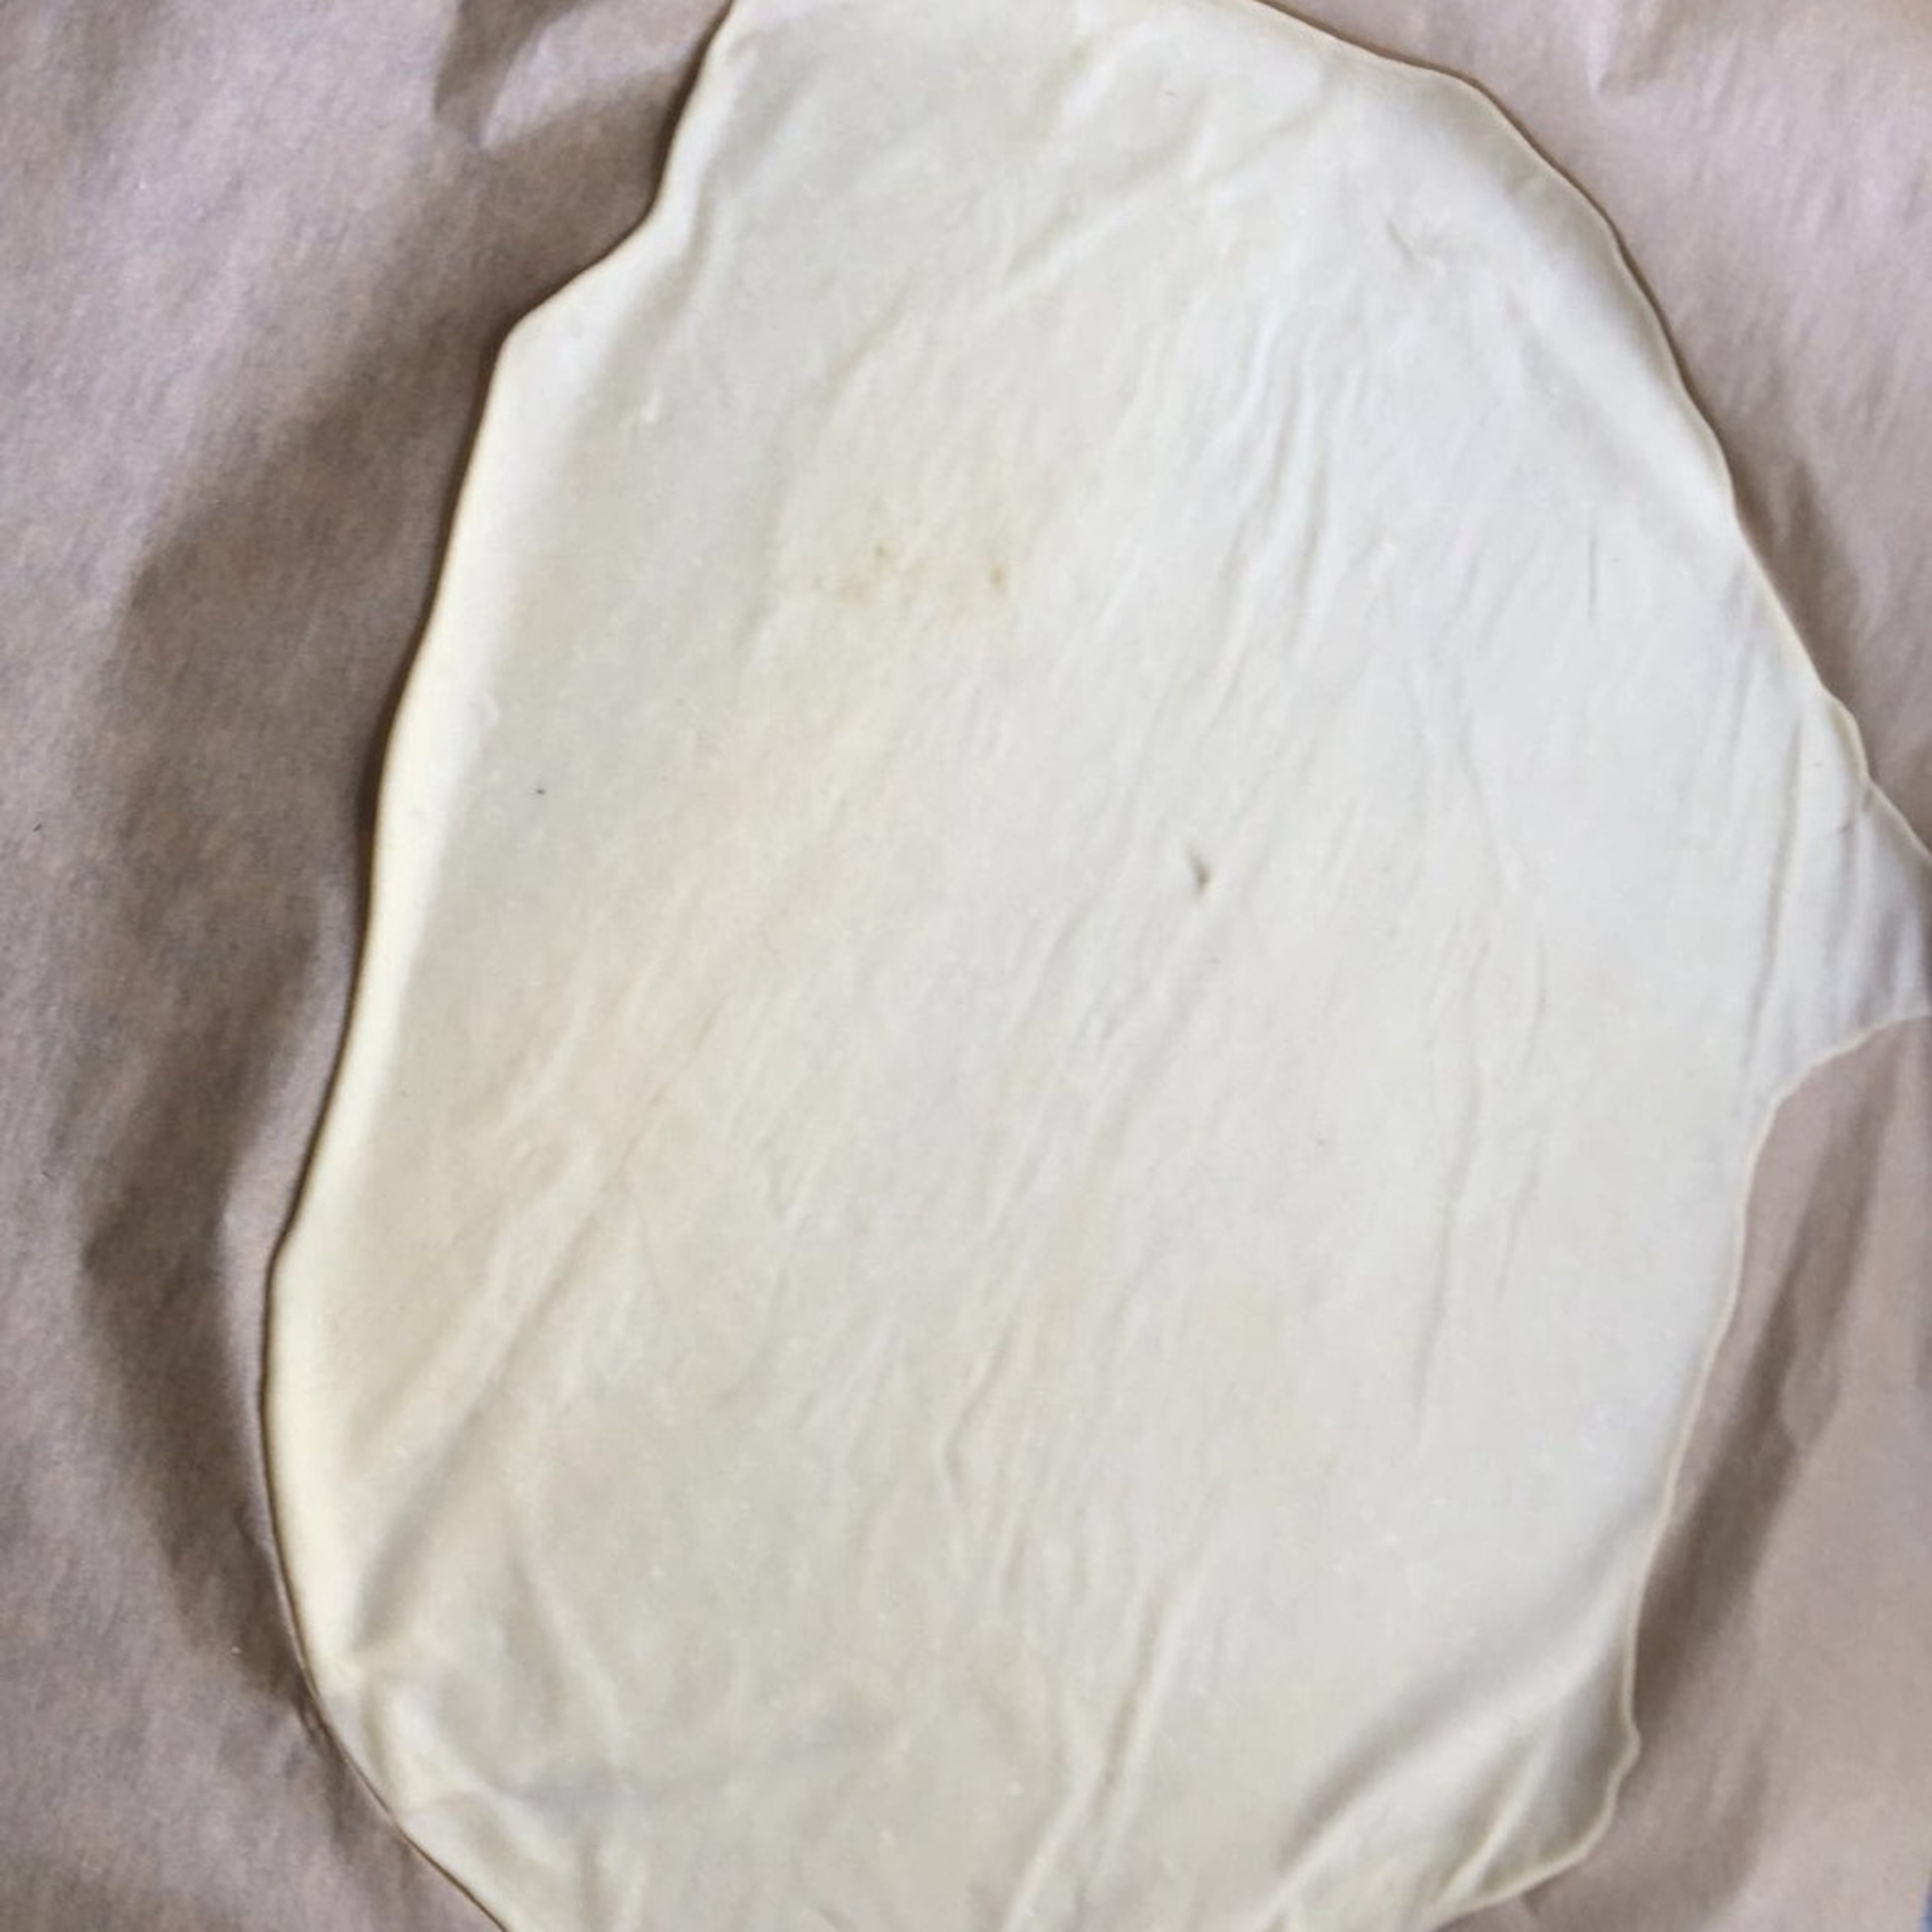 Divide dough into 4 equal-sized portions and roll out thinly. Transfer to parchment paper and roll out again. Rest for 10 min. Meanwhile, preheat the oven to 180°C/350°F (convection).